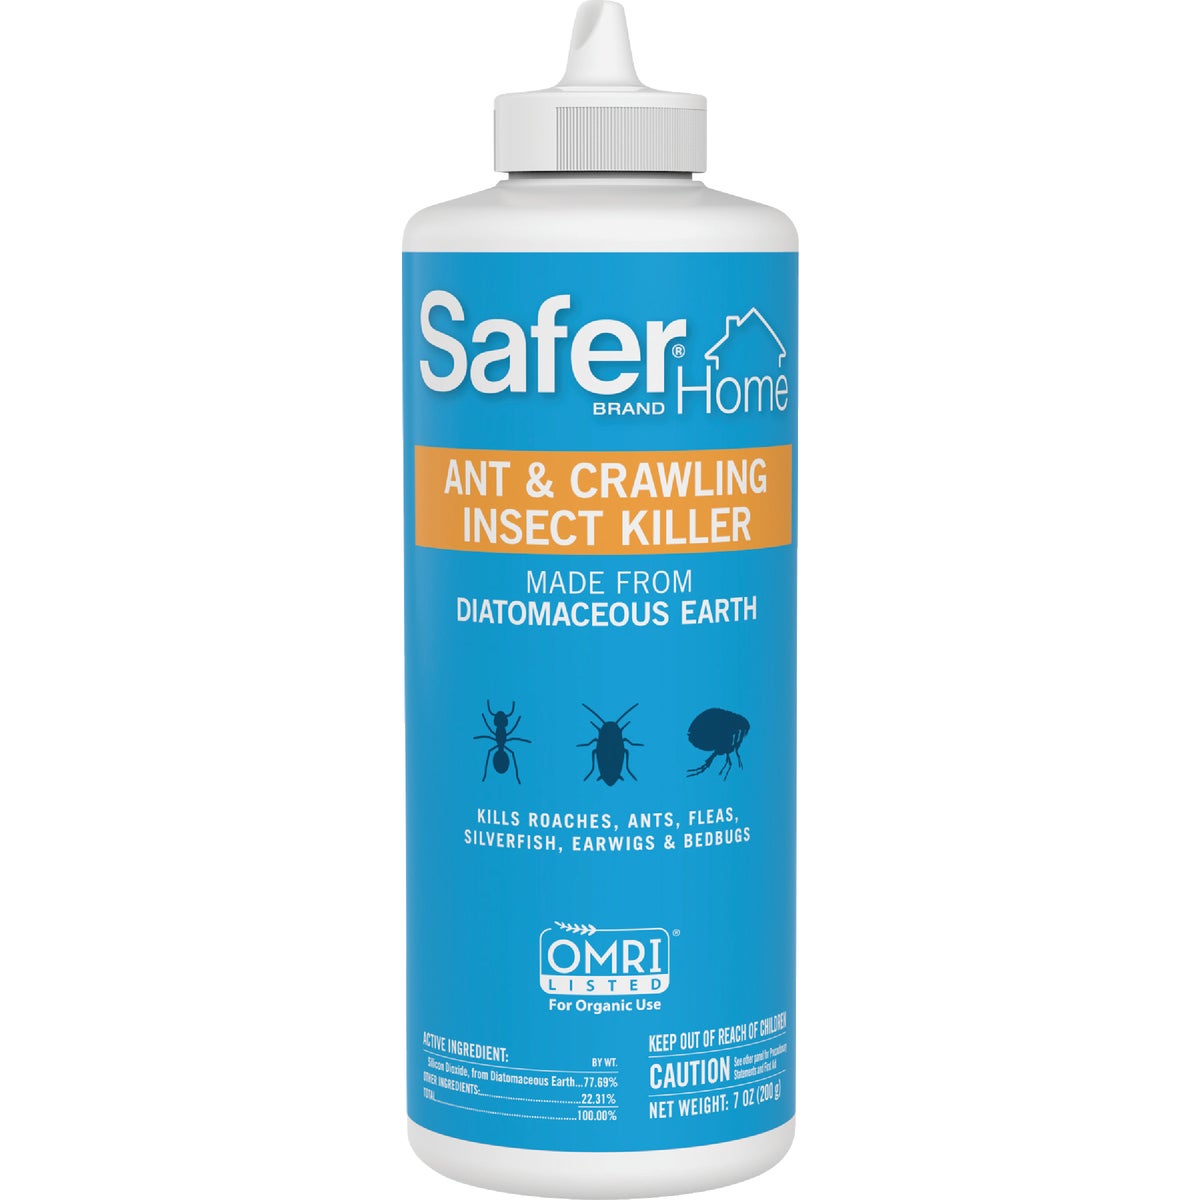 Safer Home 7 Oz. Ant & Crawling Insect Killer